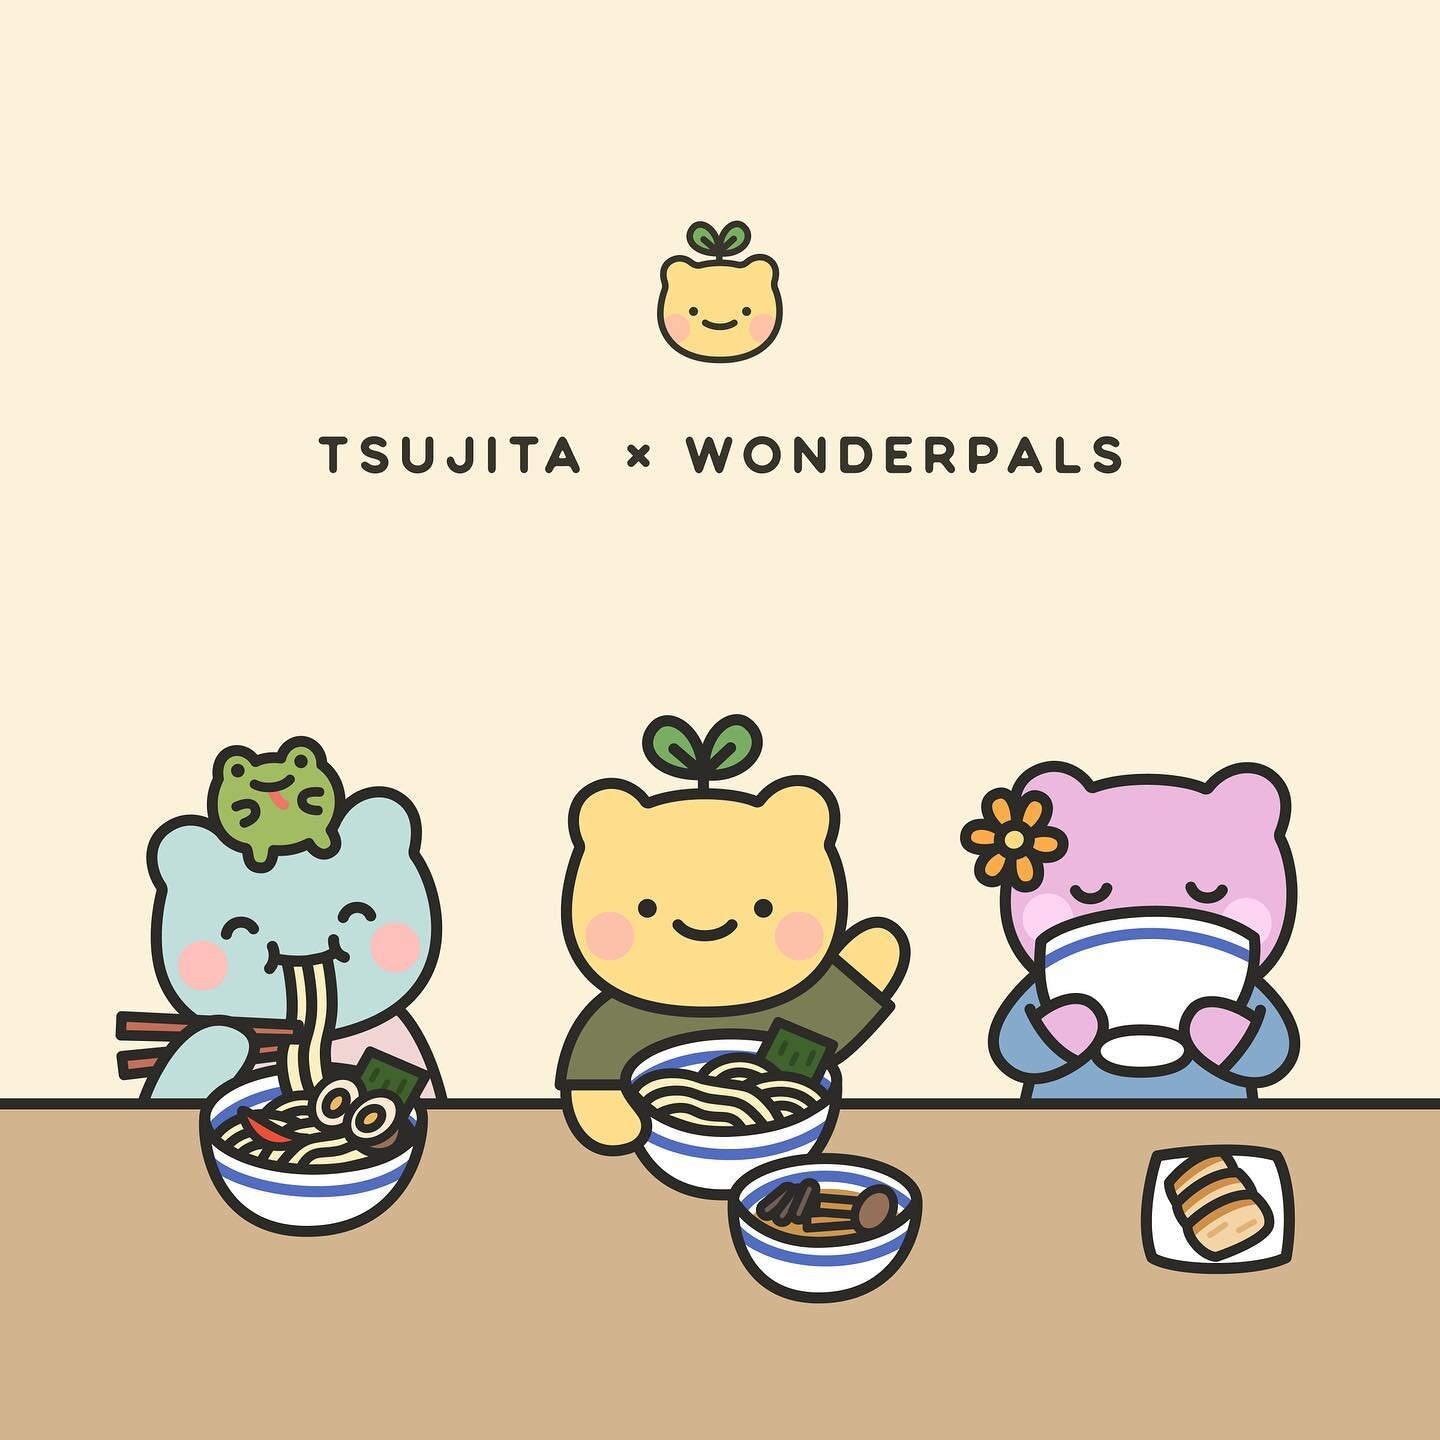 We are excited to announce our partnership with @tsujitala ! 🍜

Tsujita is a Japanese restaurant company with locations predominantly across Japan and the Los Angeles area, specializing in tsukemen dipping ramen and were the pioneers of introducing 